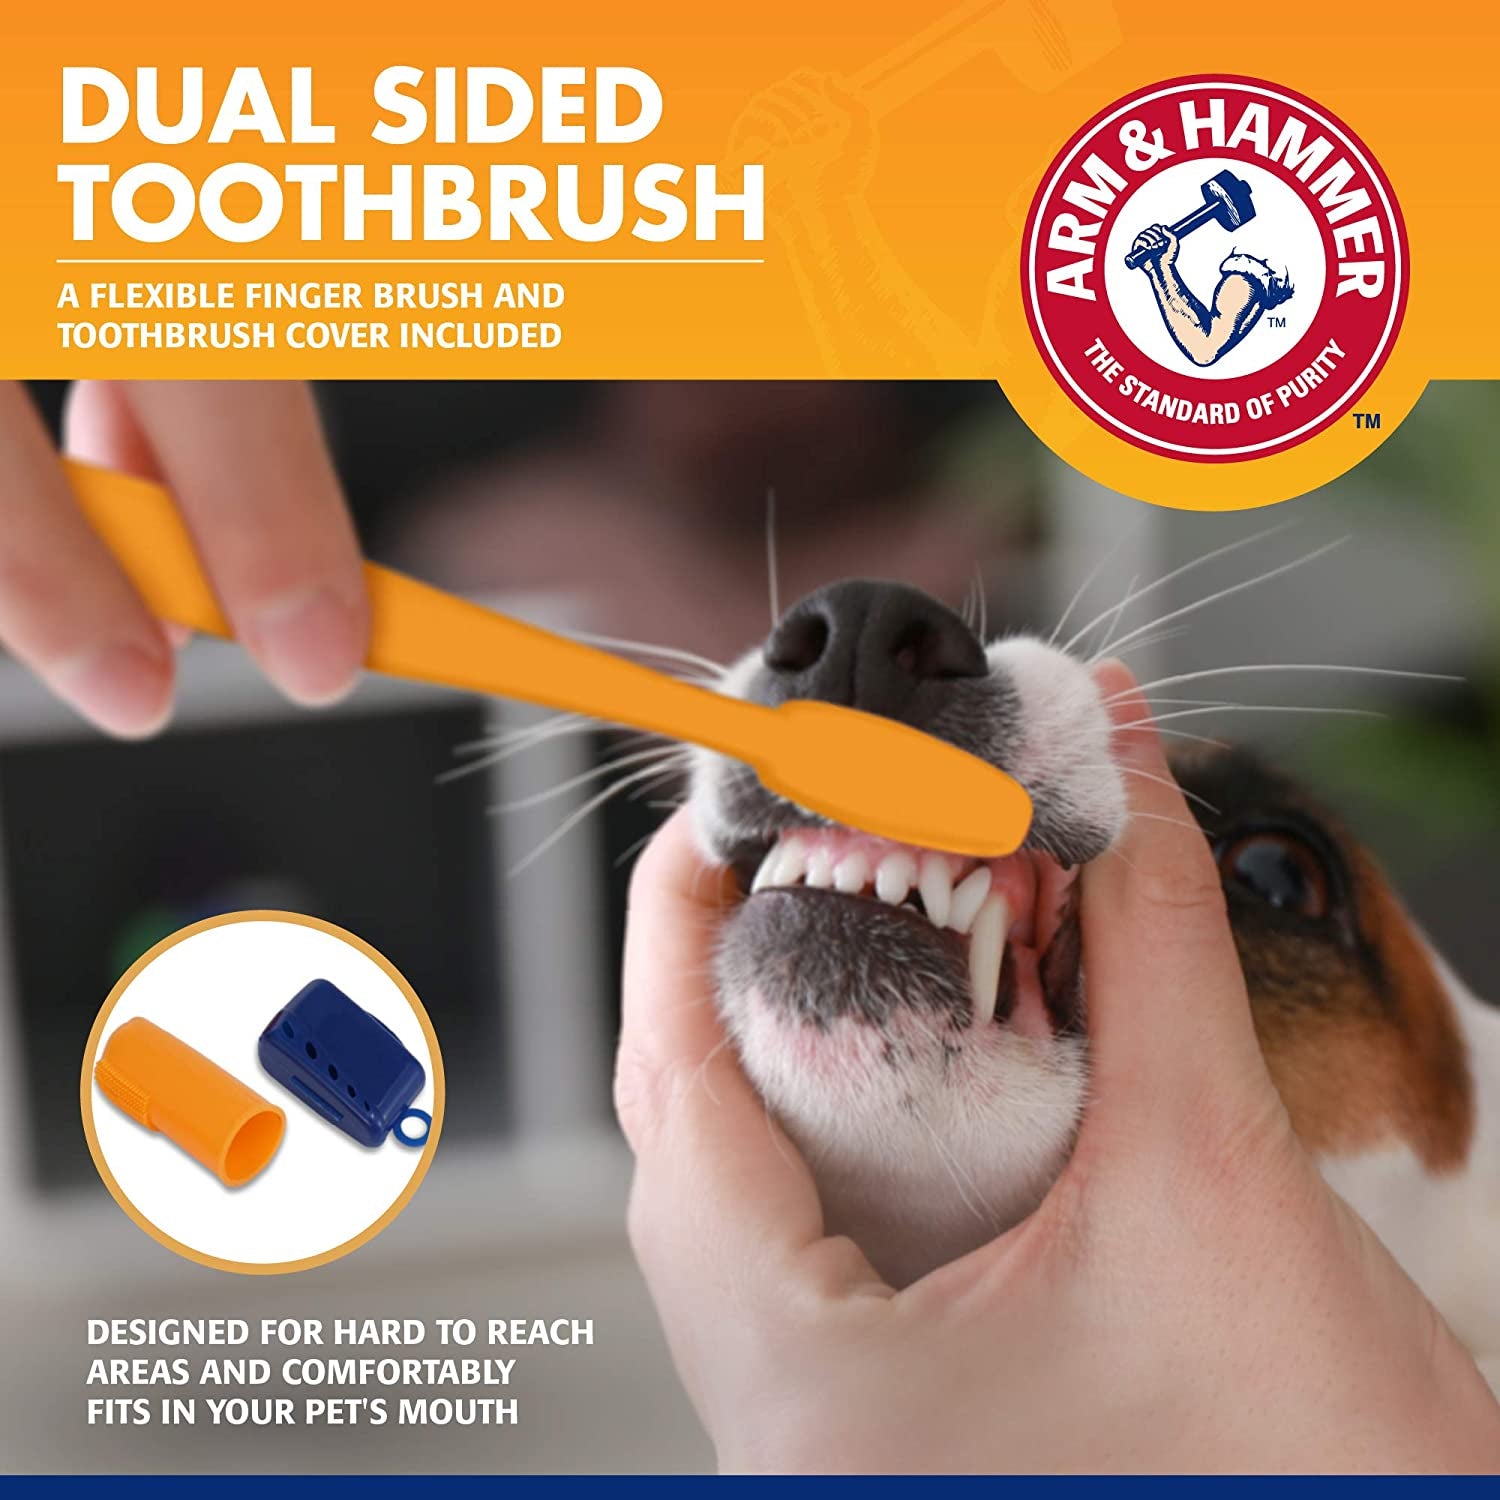 for Pets Tartar Control Kit for Dogs | Contains Toothpaste, Toothbrush & Fingerbrush | Reduces Plaque & Tartar Buildup, 3-Piece Kit, Banana Mint Flavor